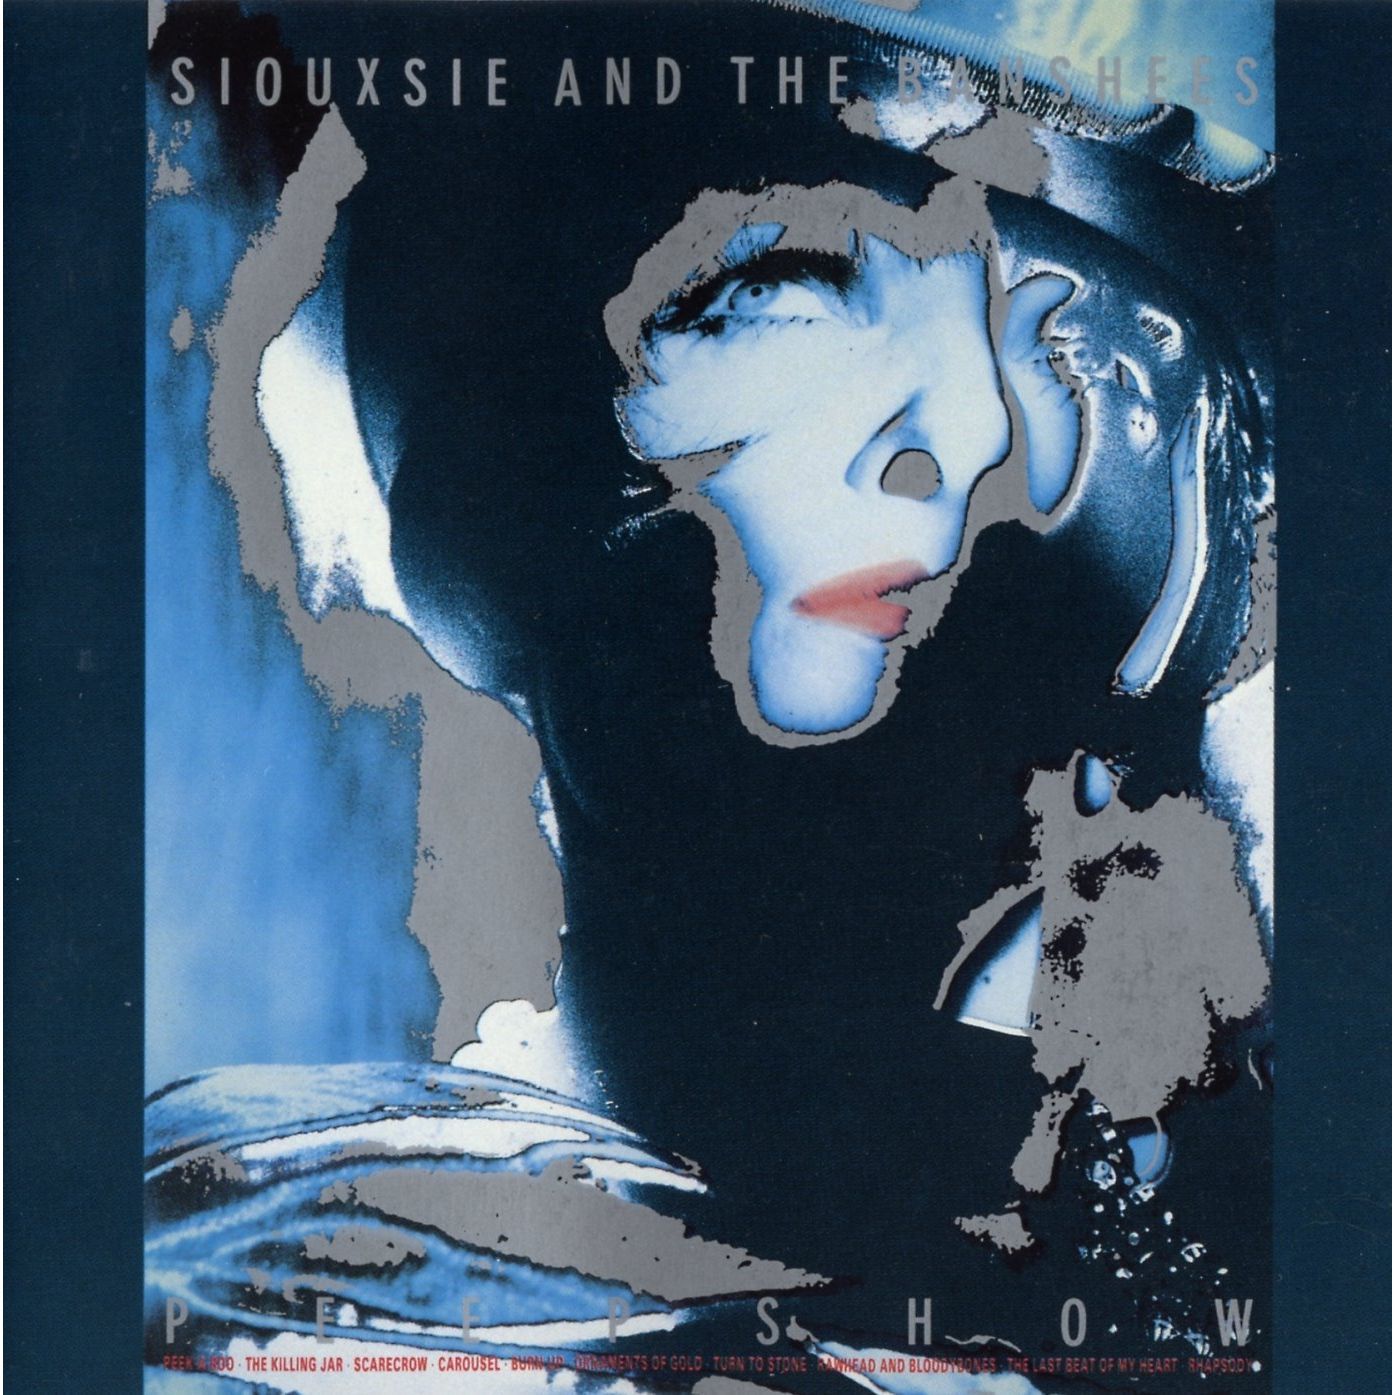 Music Monday: Siouxsie And The Banshees (Part 1)